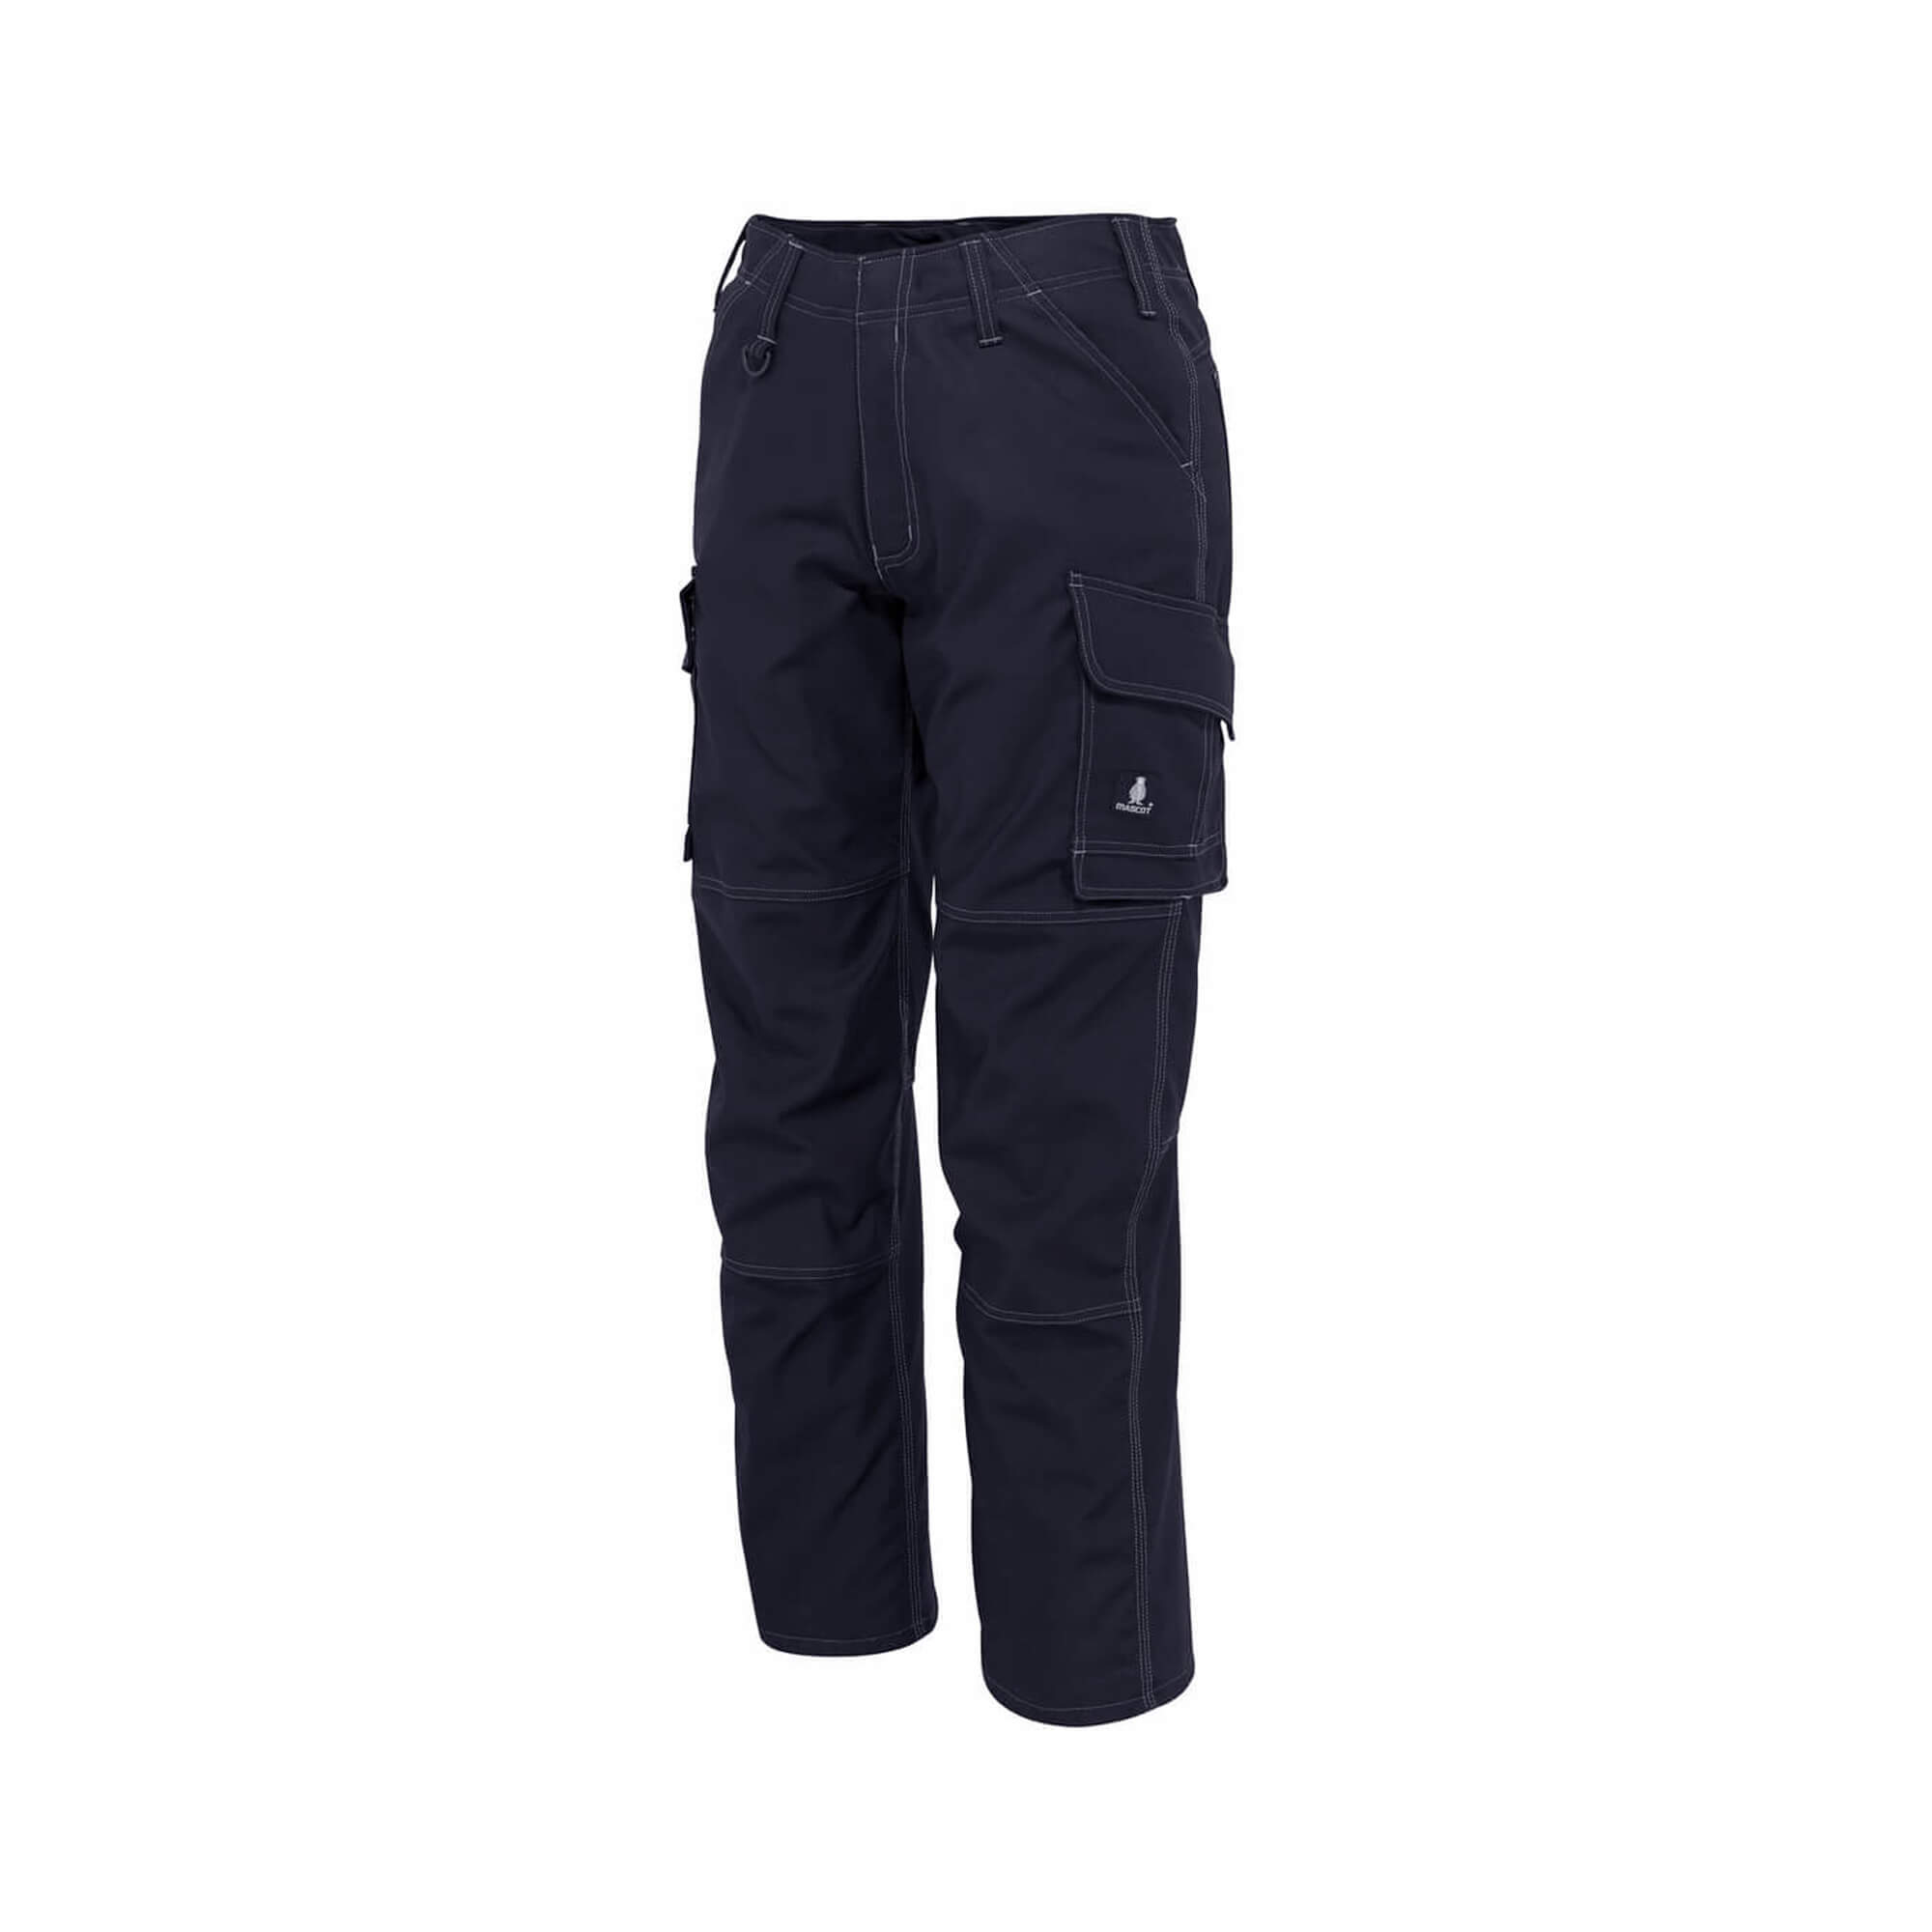 Work trousers for Firefighters Mascot® New Haven